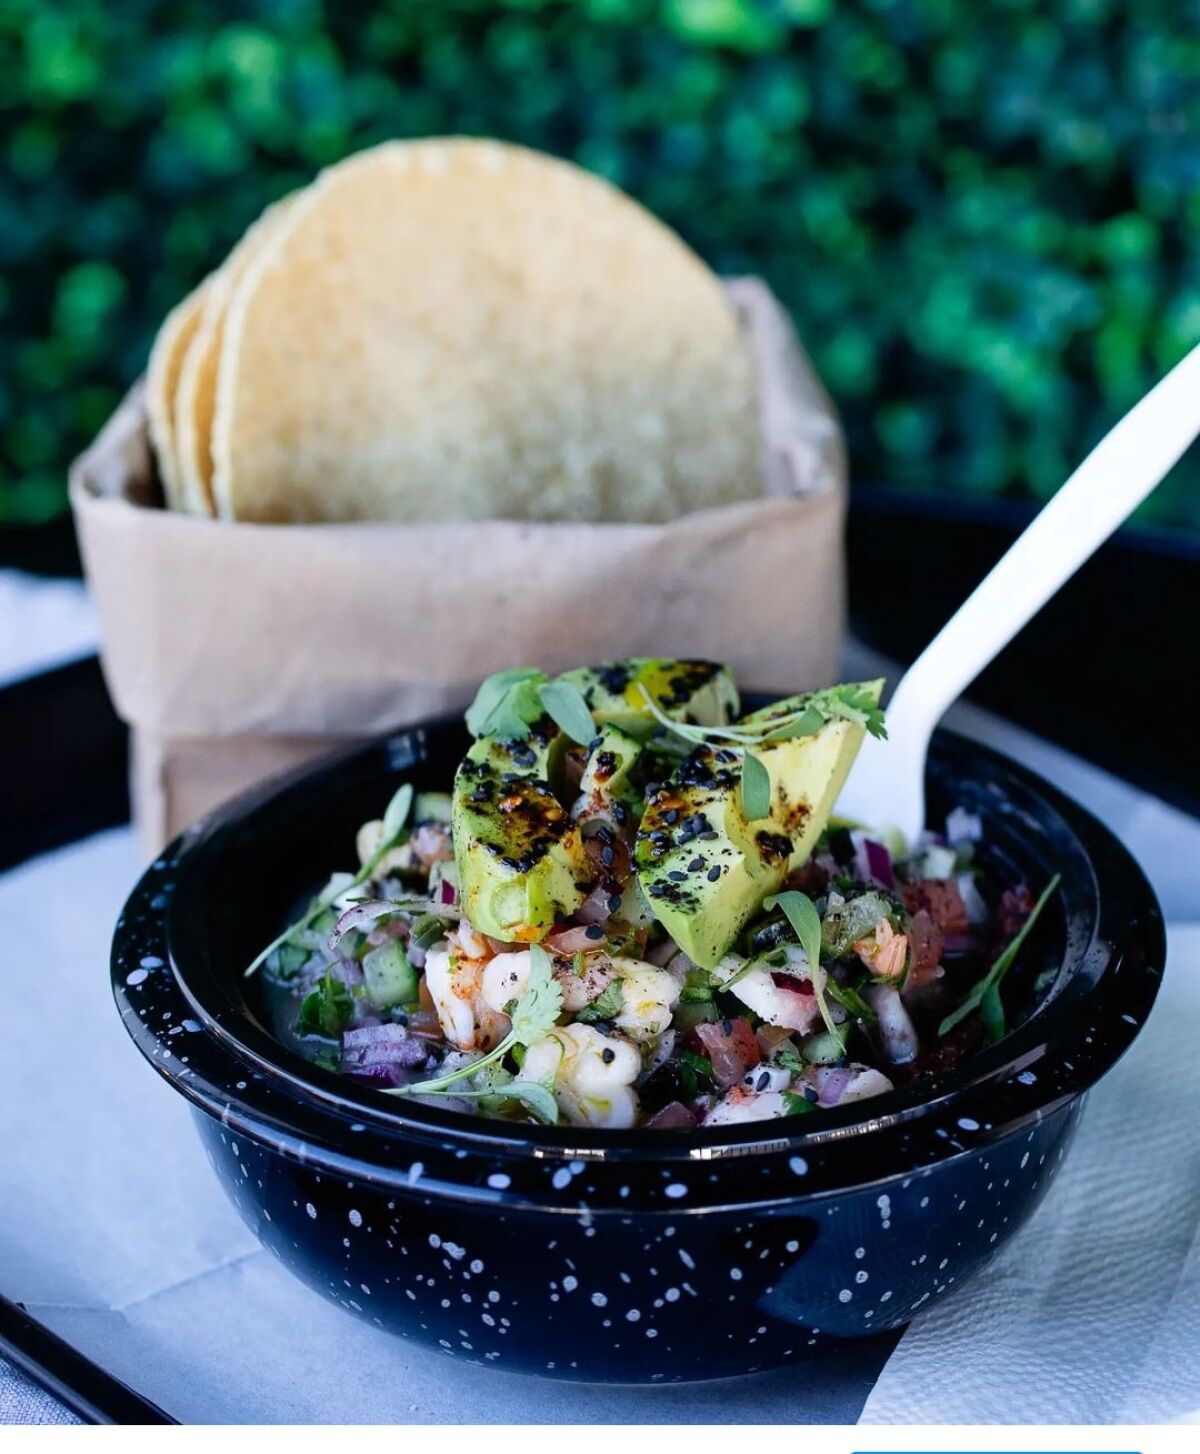 Mar Rustico's ceviche bowls are served with tostada shells